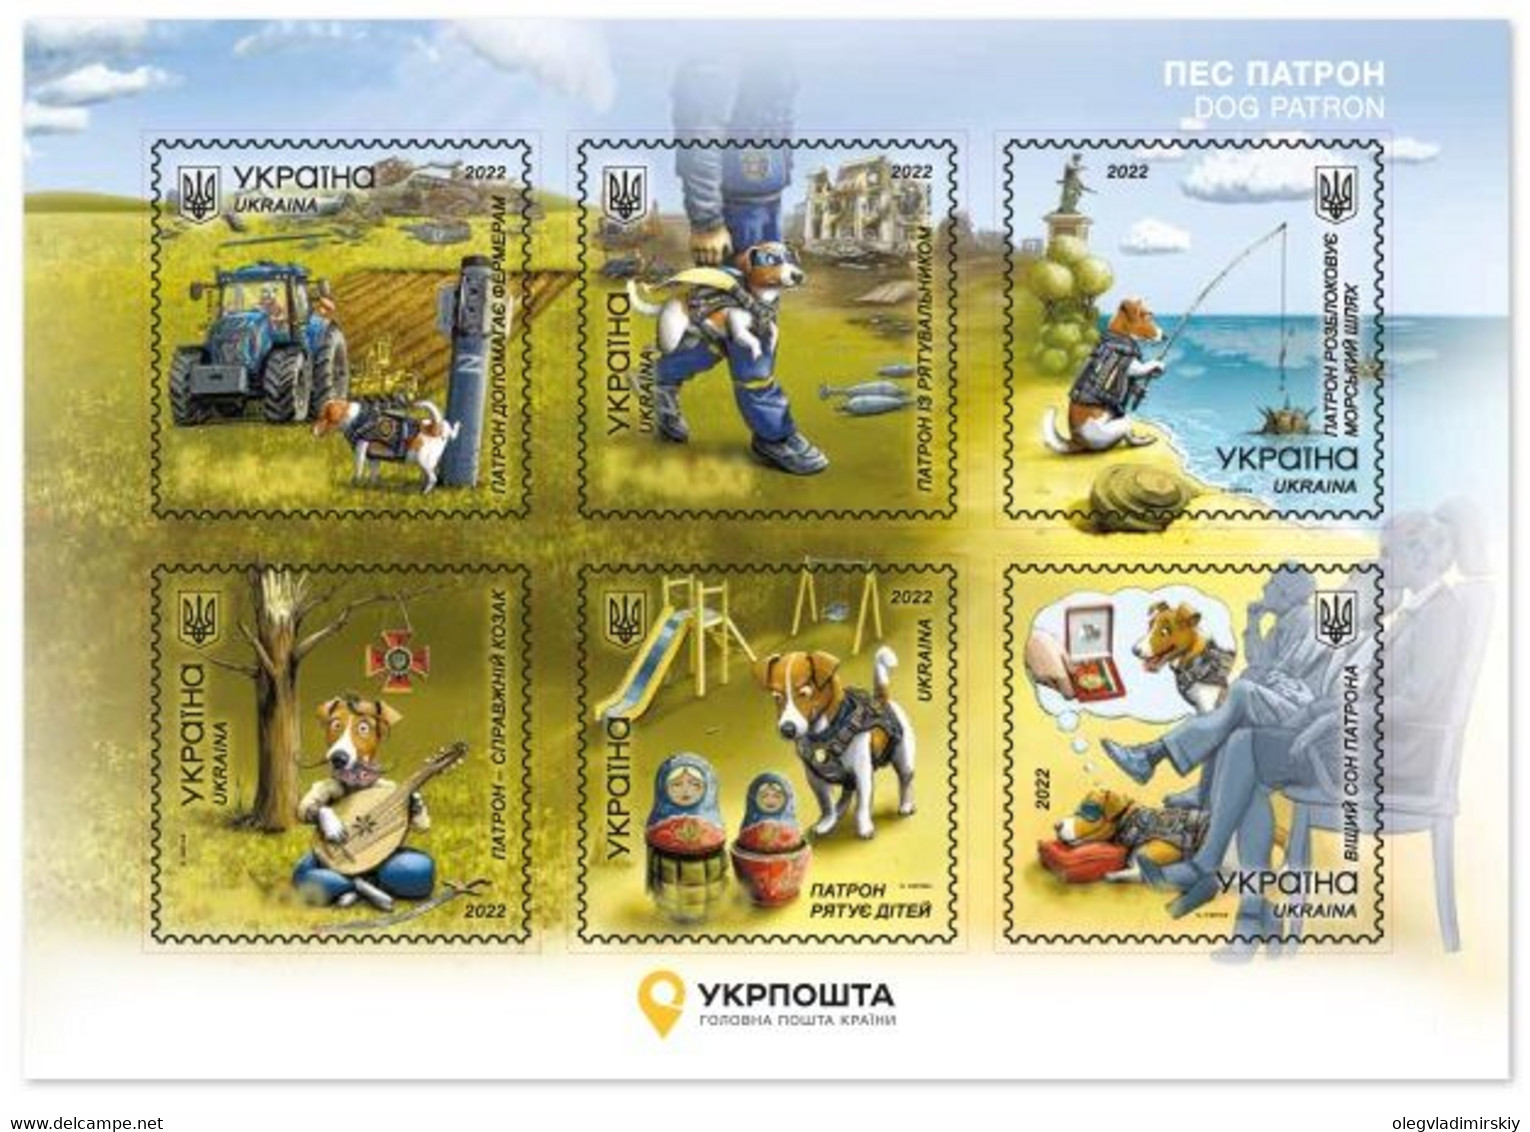 Ukraine 2022 The Famous Sapper Dog Patron - Army Assistant Postal Charity Issue Set Of 6 Non-postage Stamps In A Block - Bambole